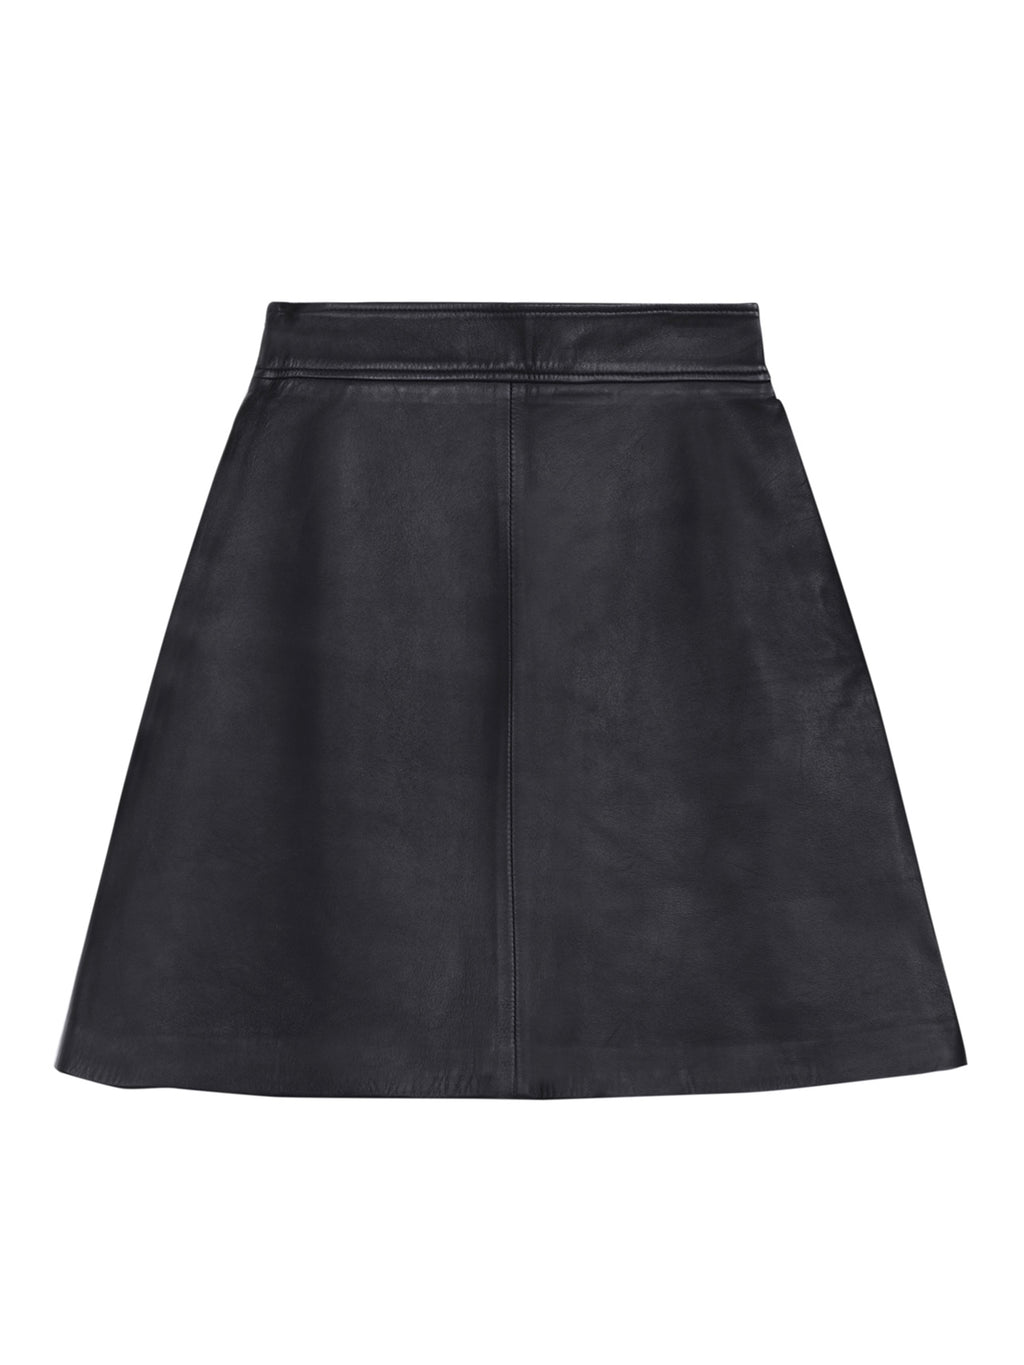 The leather Kimi skirt